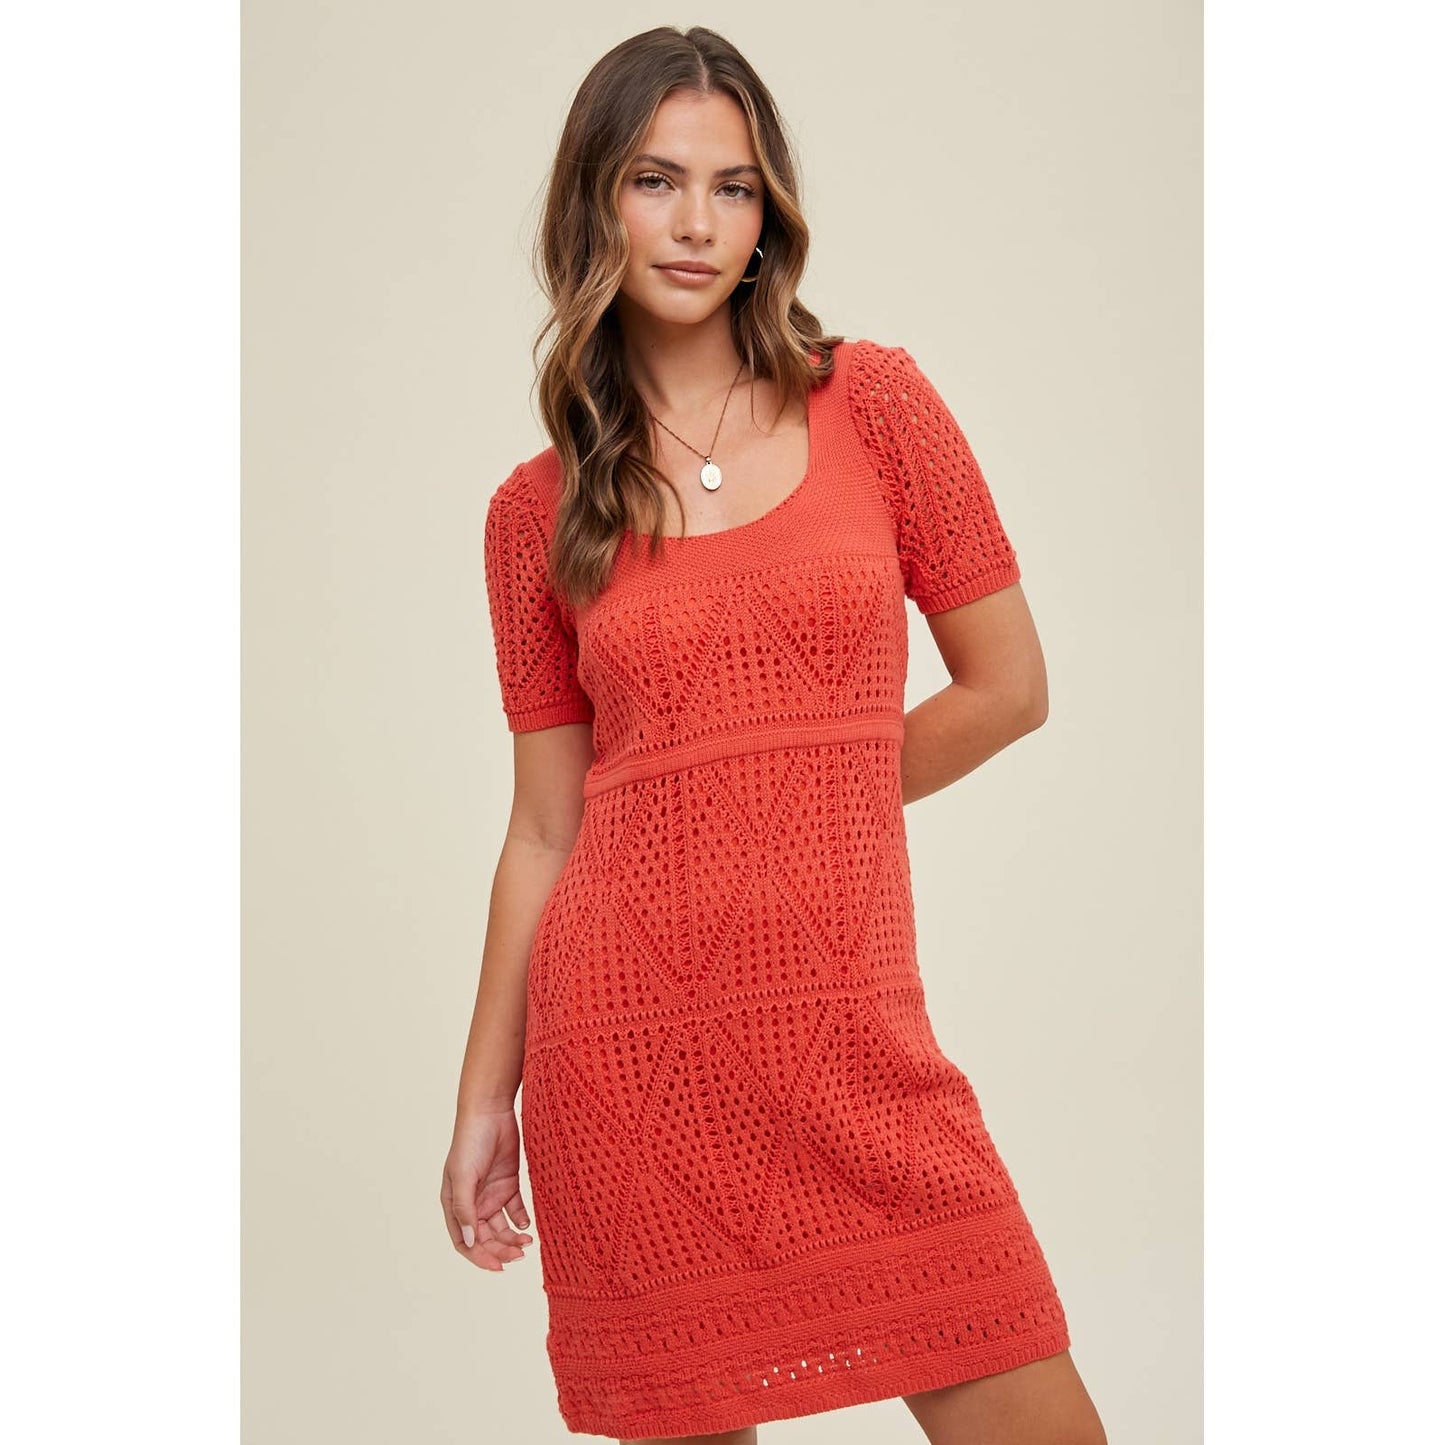 Coral Crochet Dress with Tie Back Detail